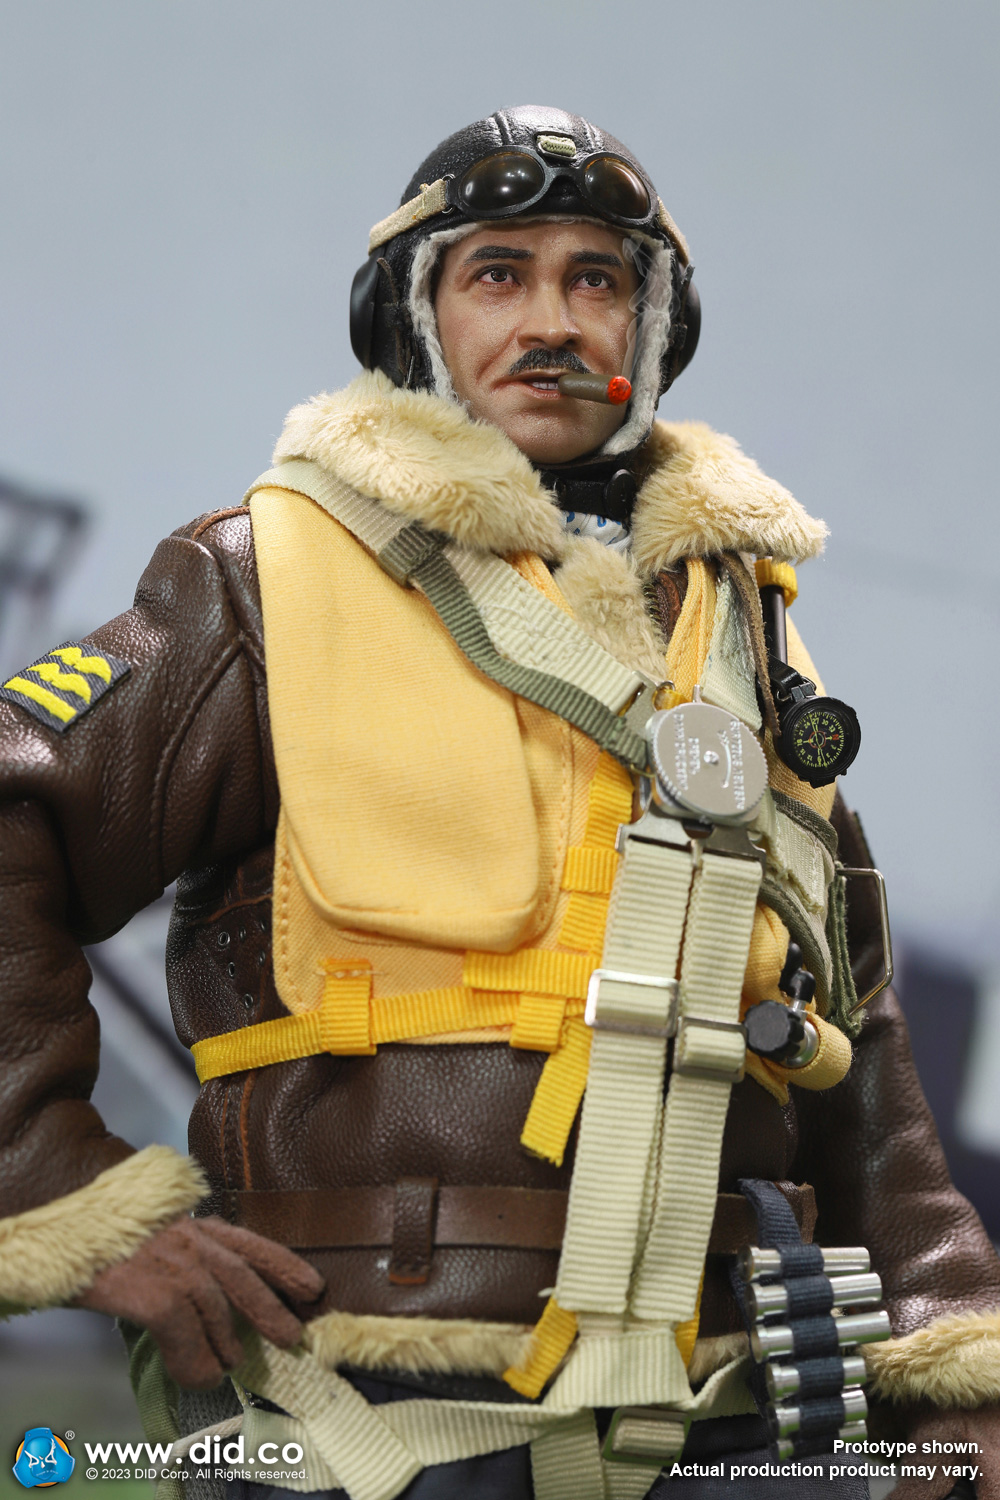 historical - NEW PRODUCT: DiD: D80165 WWII German Luftwaffe Ace Pilot – Adolf Galland 1232